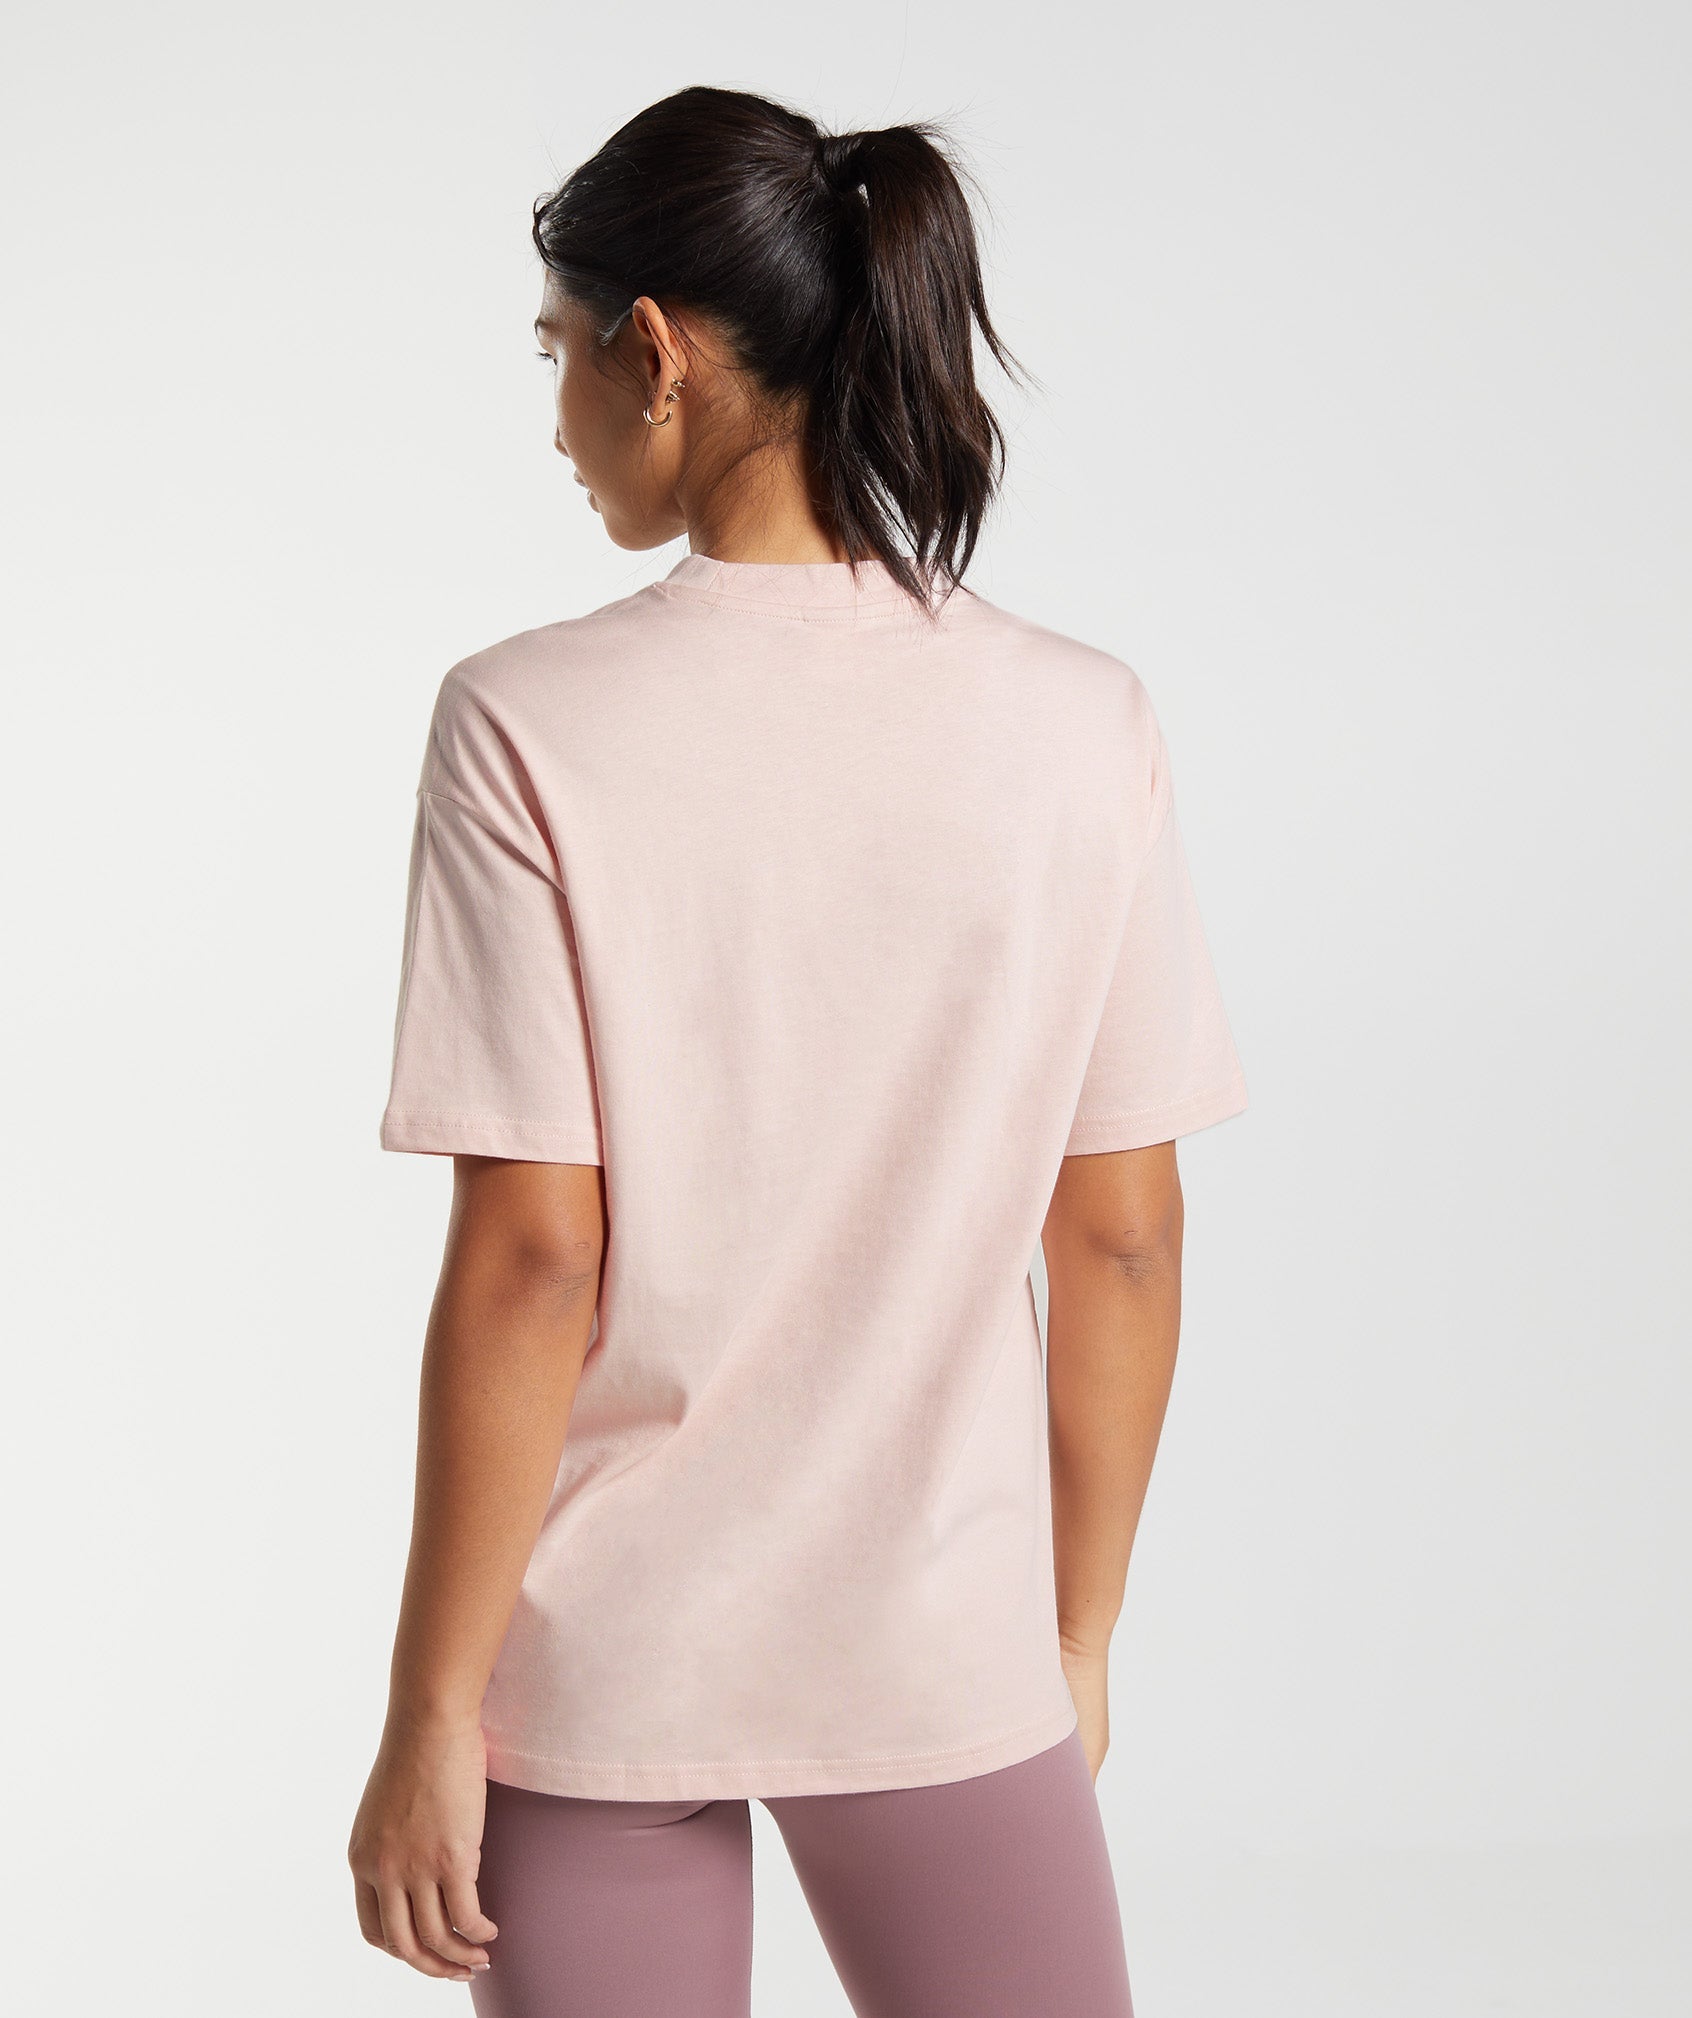 Training Oversized T-Shirt in Misty Pink - view 2